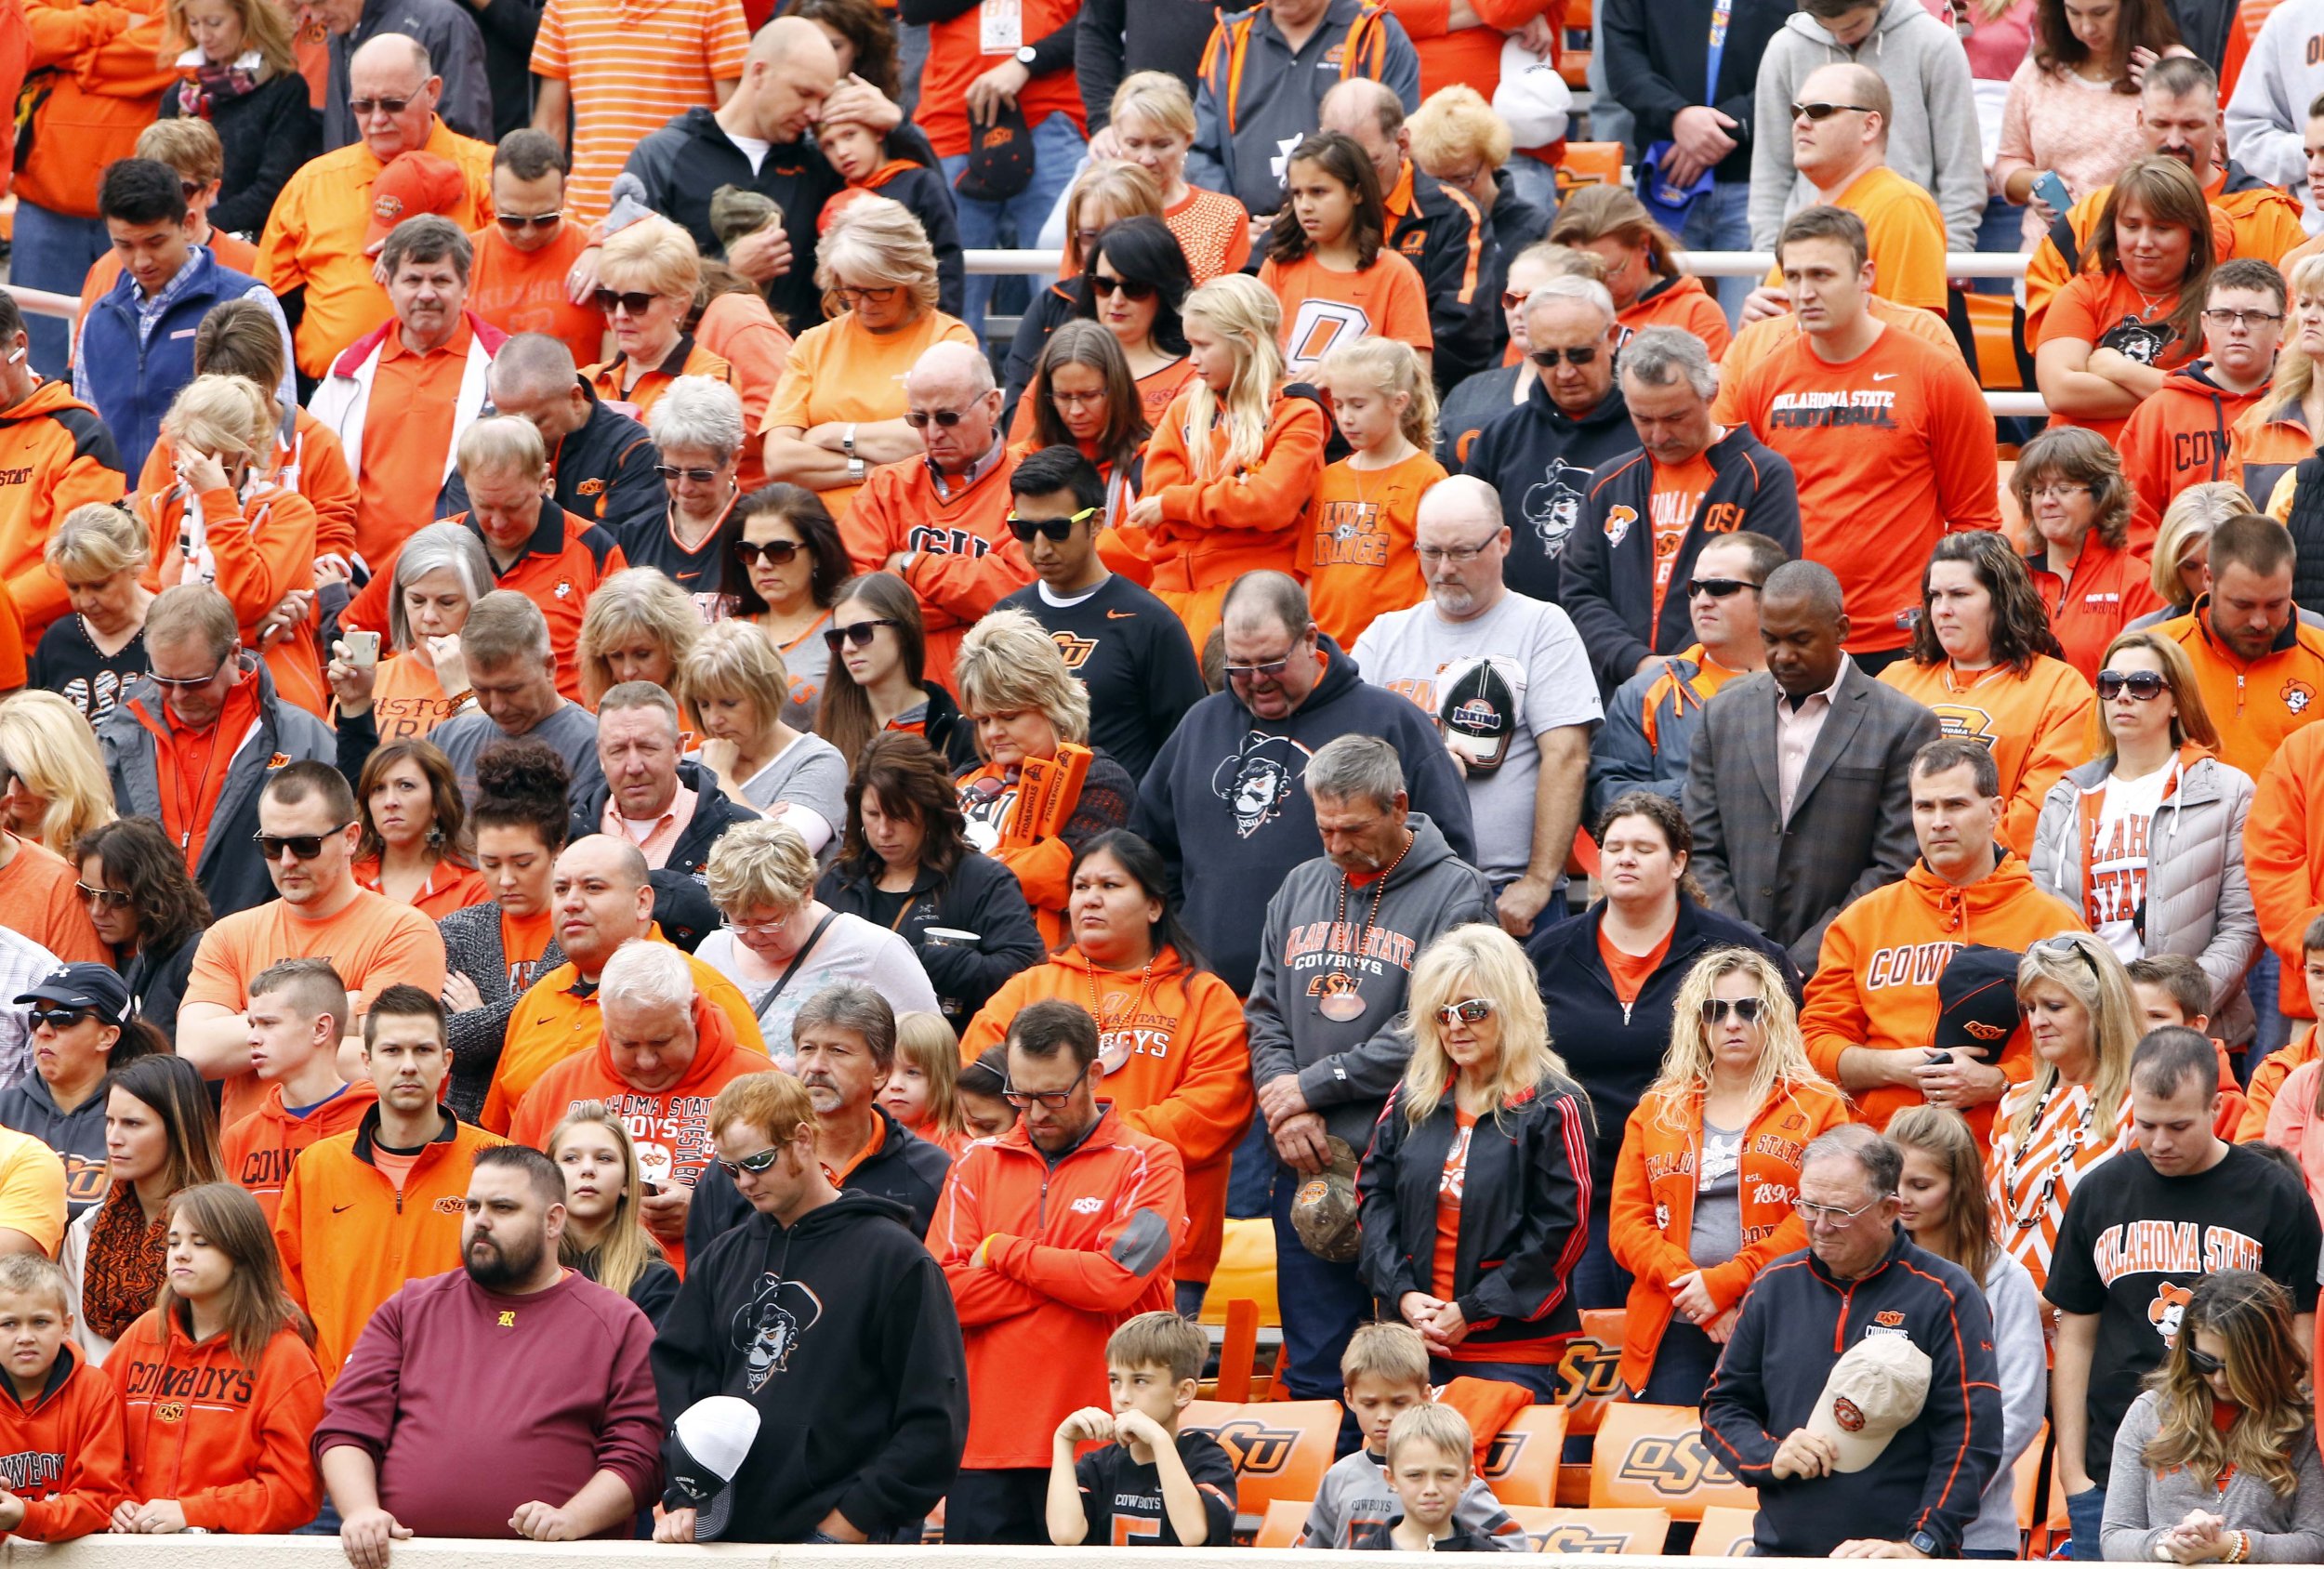 StillwaterStrong Movement Grows After Oklahoma State Parade